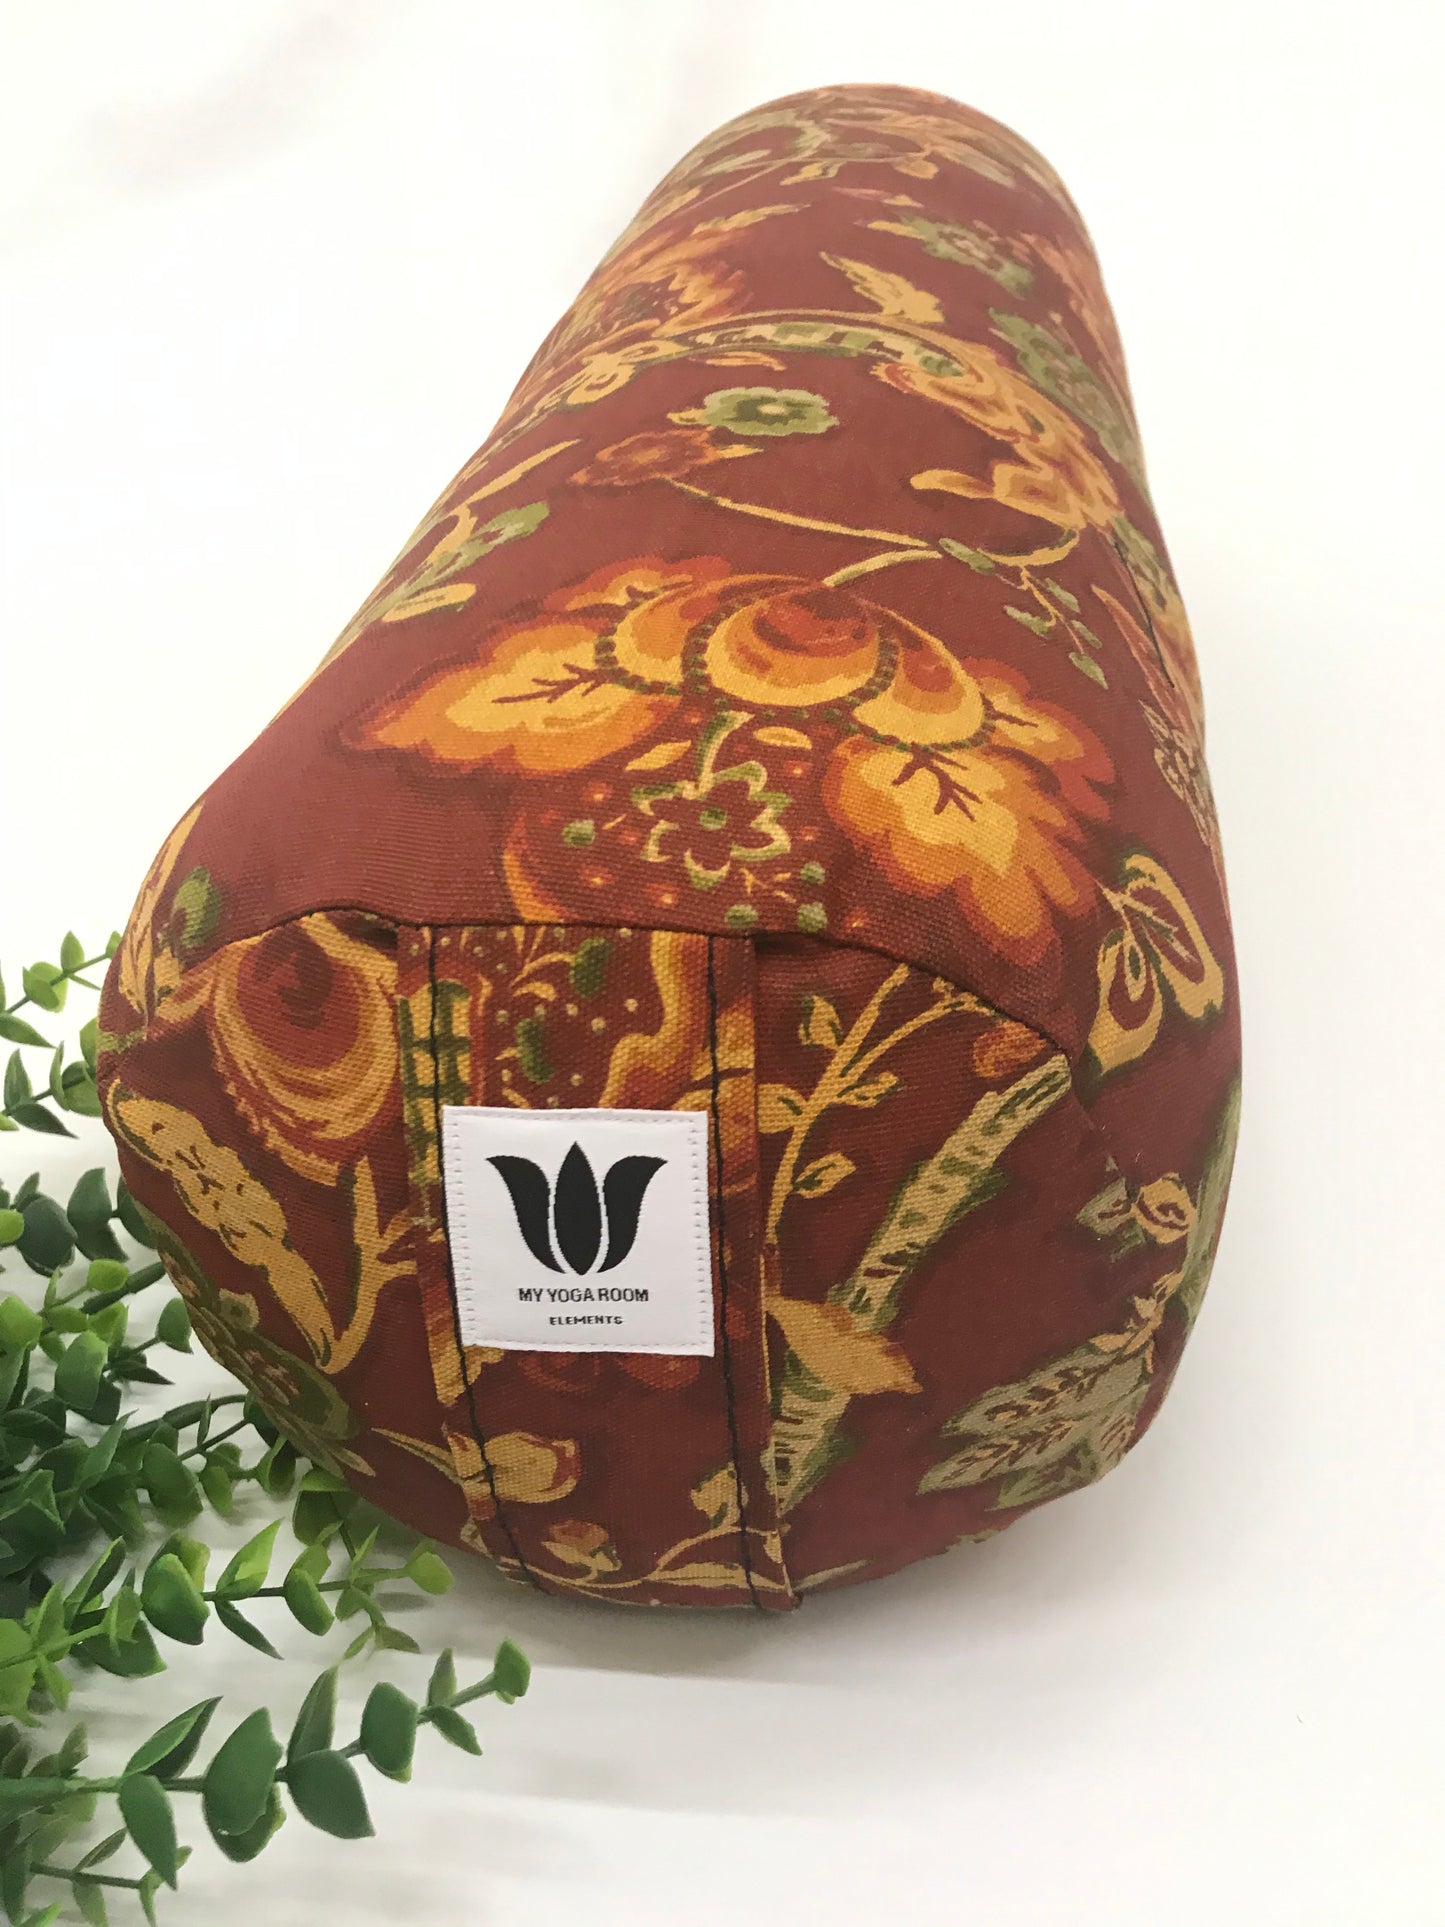 Round yoga bolster in cotton canvas burnt orange floral print fabric. Allergy conscious fill with removeable cover. Made in Canada by My Yoga Room Elements